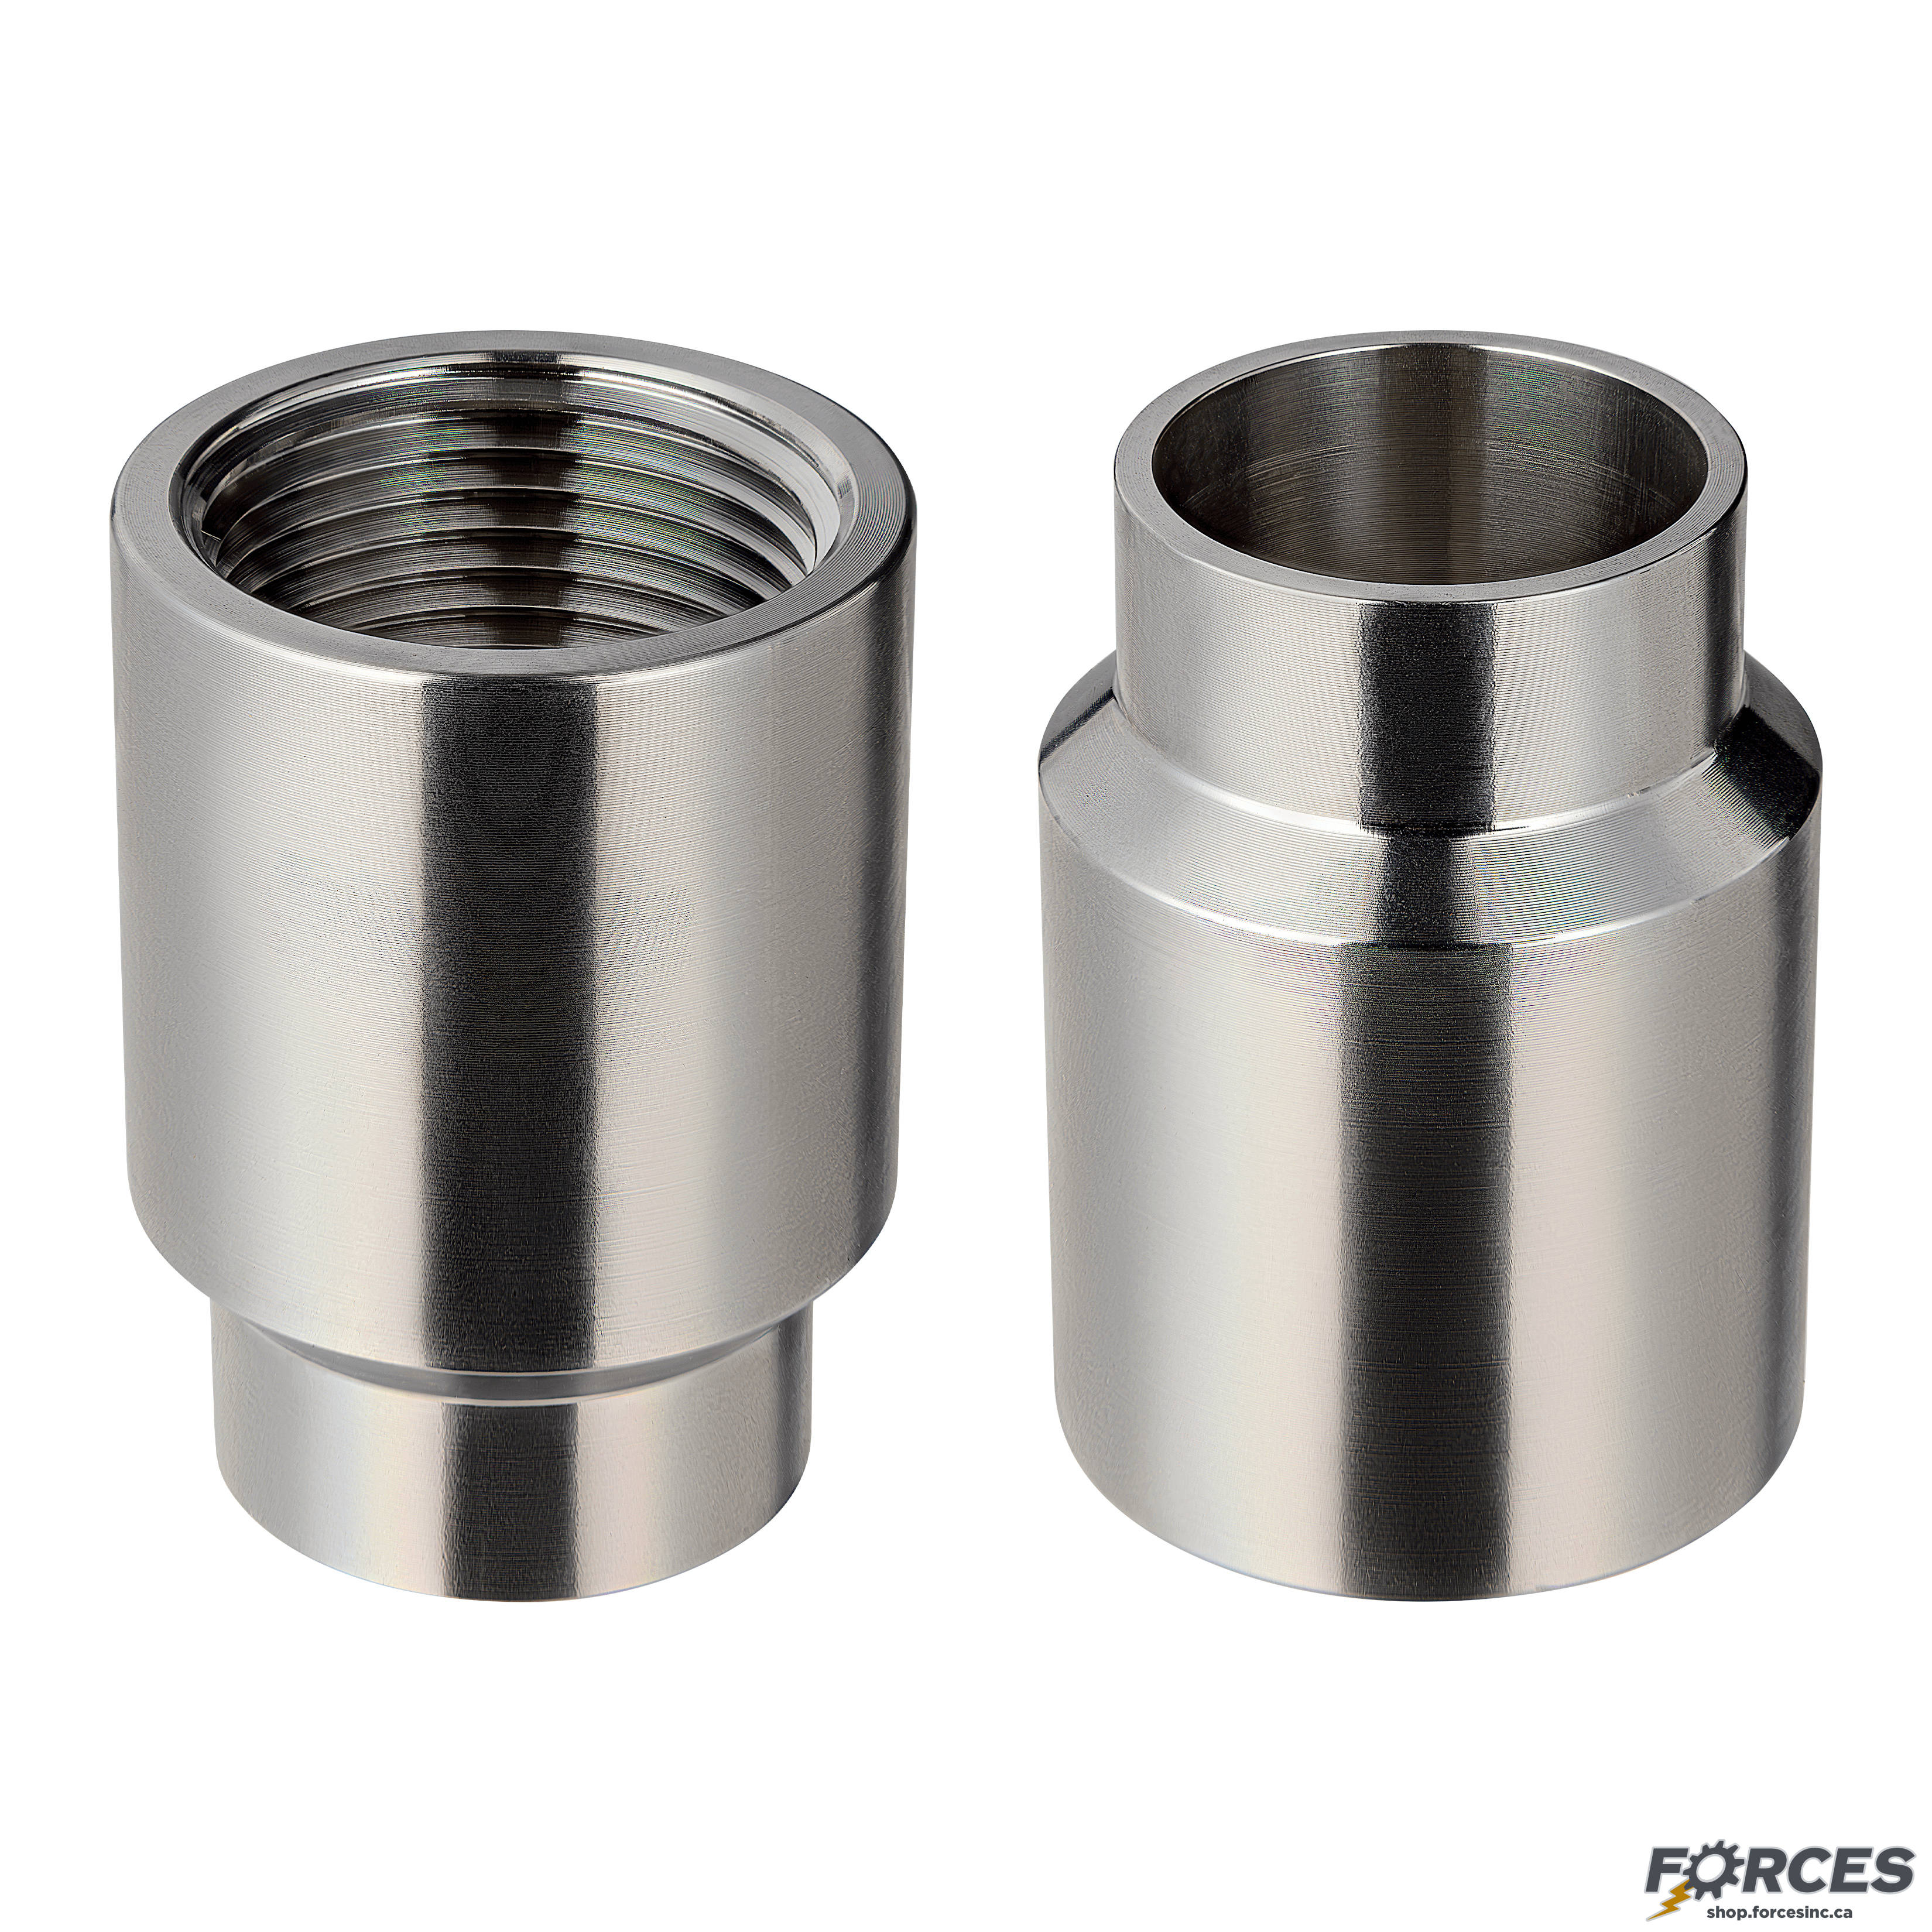 1-1/2" x 1-1/2" Butt Weld x Female NPT Adapter - Stainless Steel 316 - Forces Inc